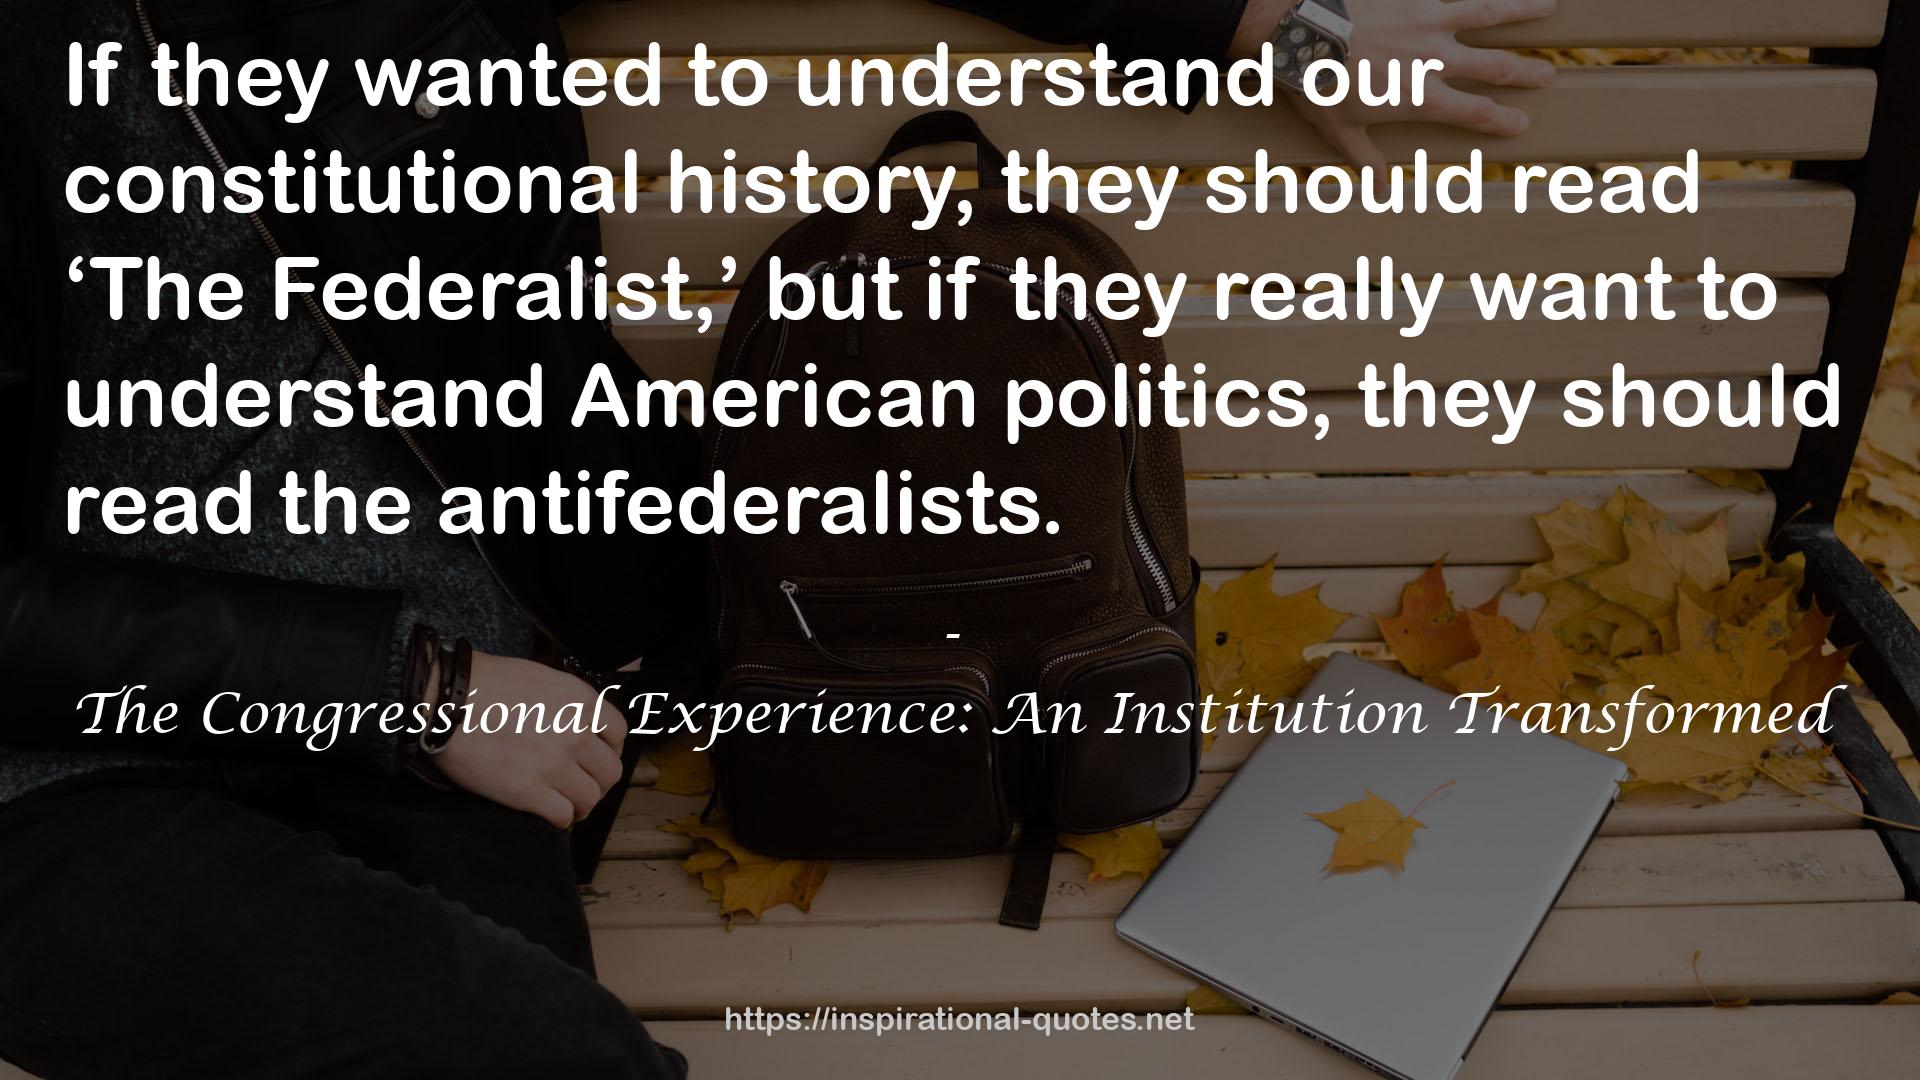 The Congressional Experience: An Institution Transformed QUOTES